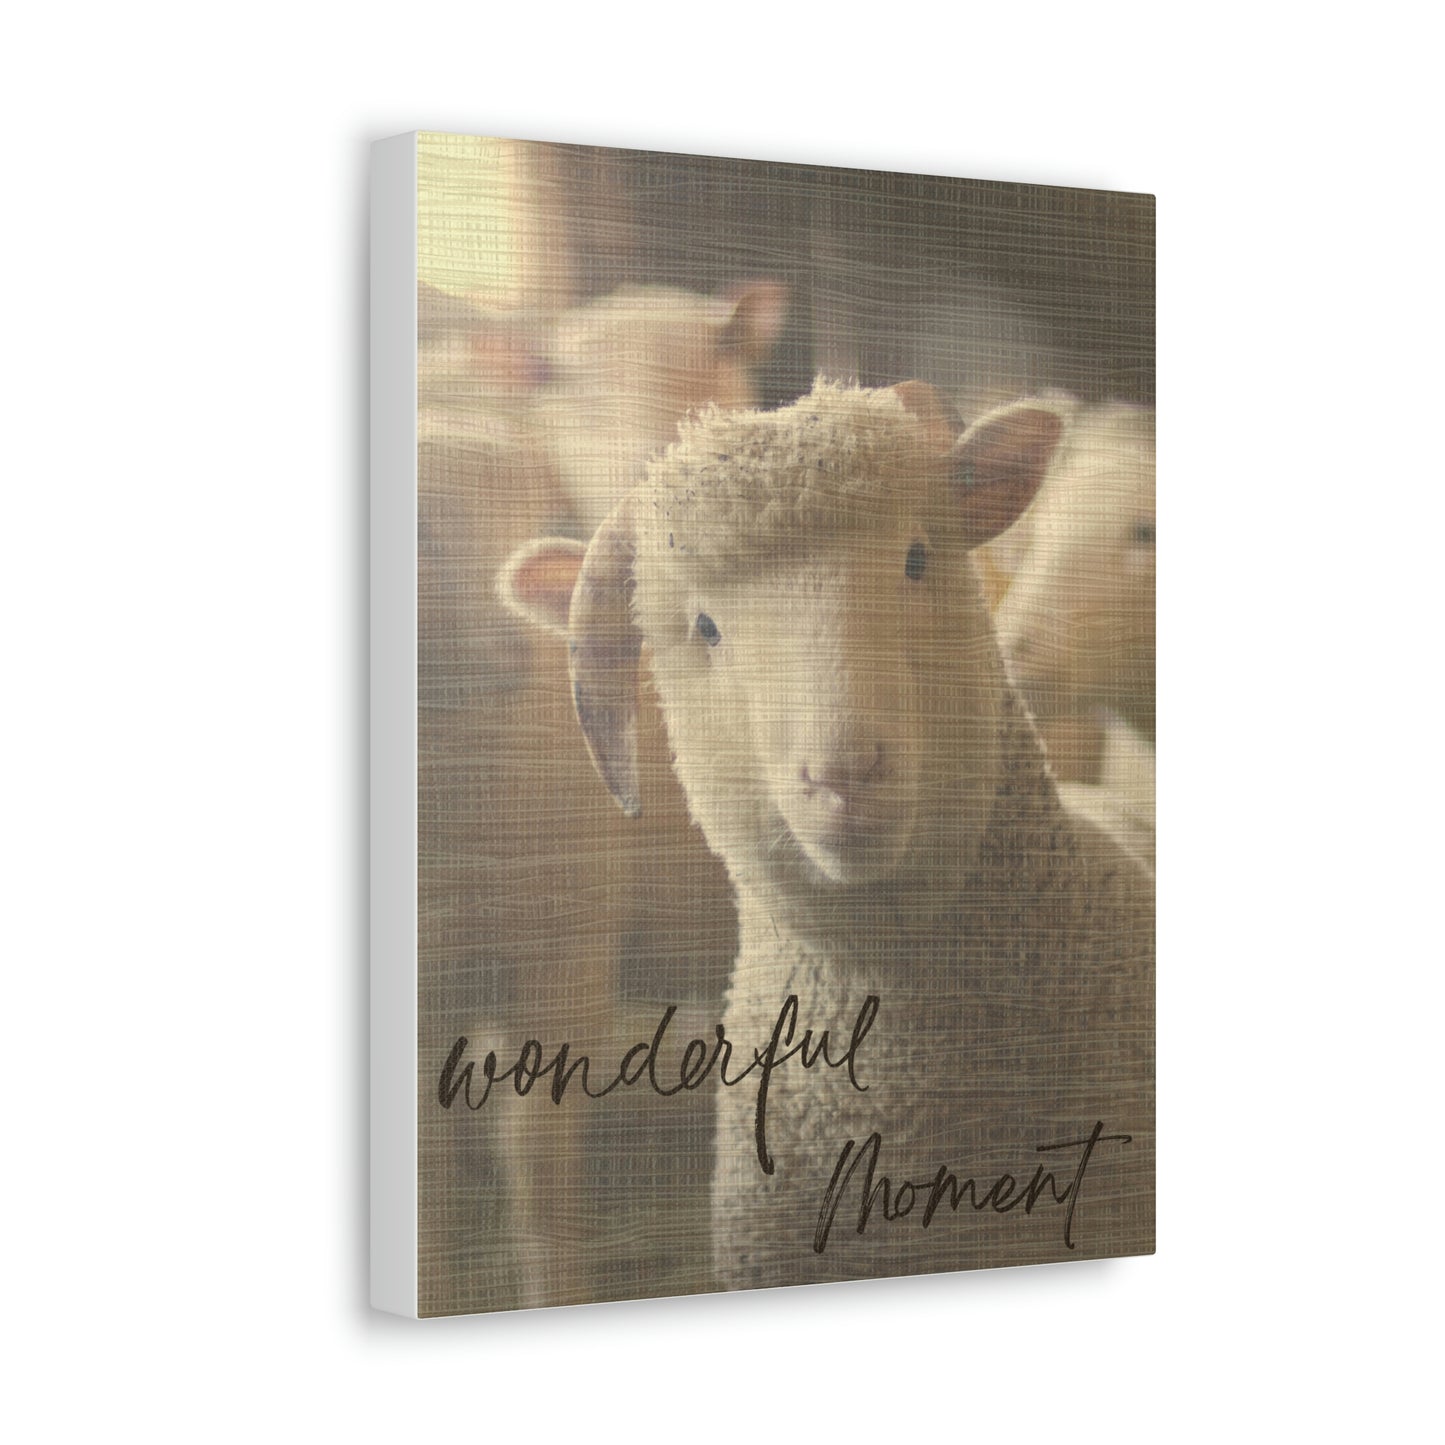 " Wonderful Moment " Charming Sheep design Canvas Gallery Wraps poster